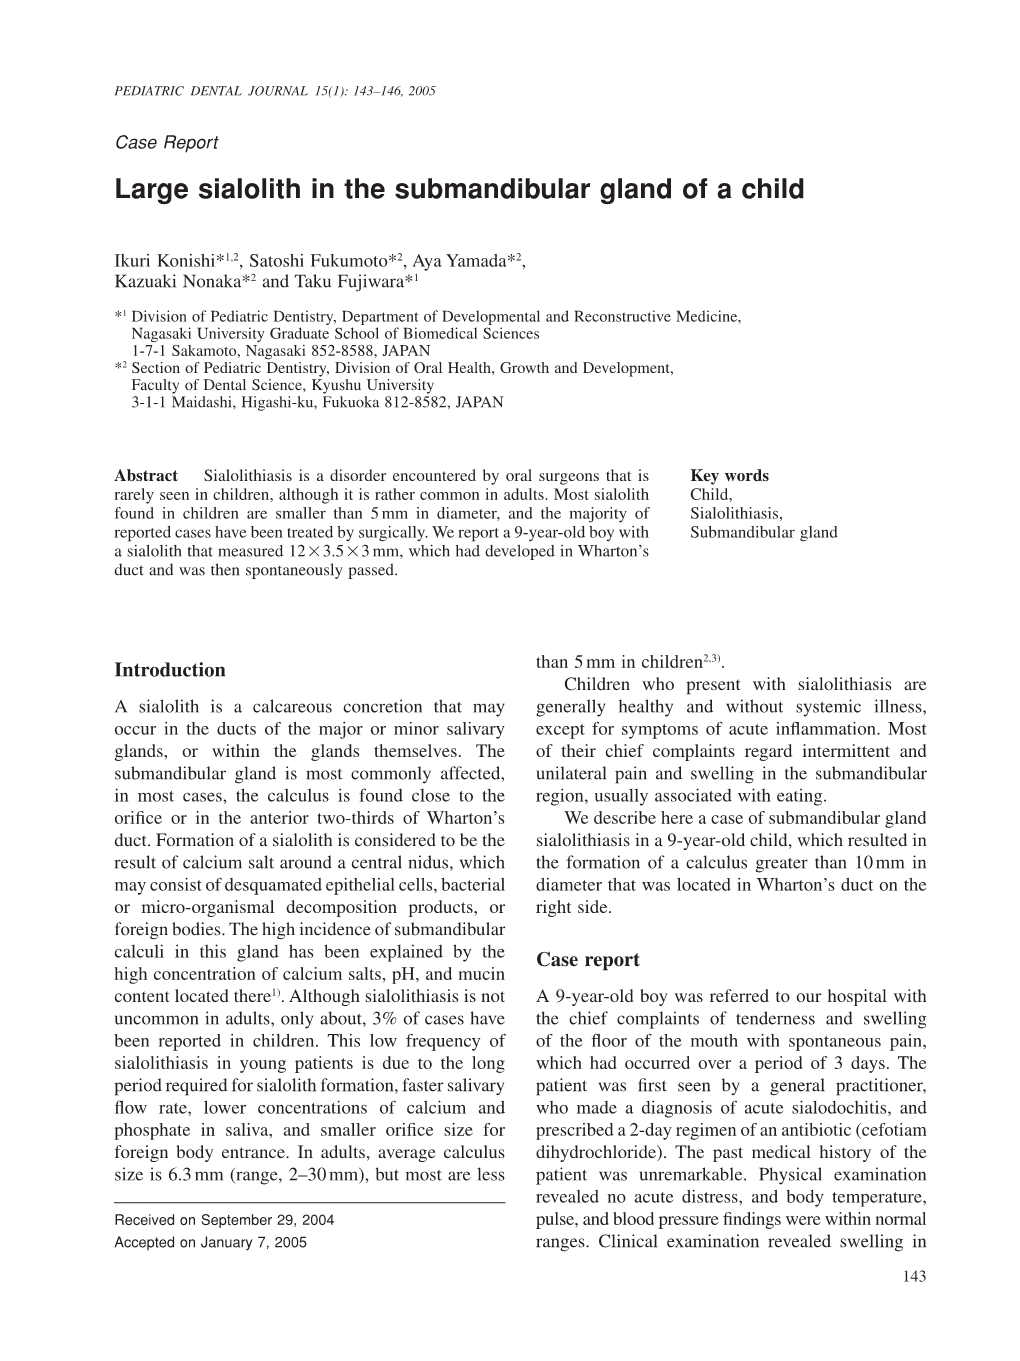 Large Sialolith in the Submandibular Gland of a Child